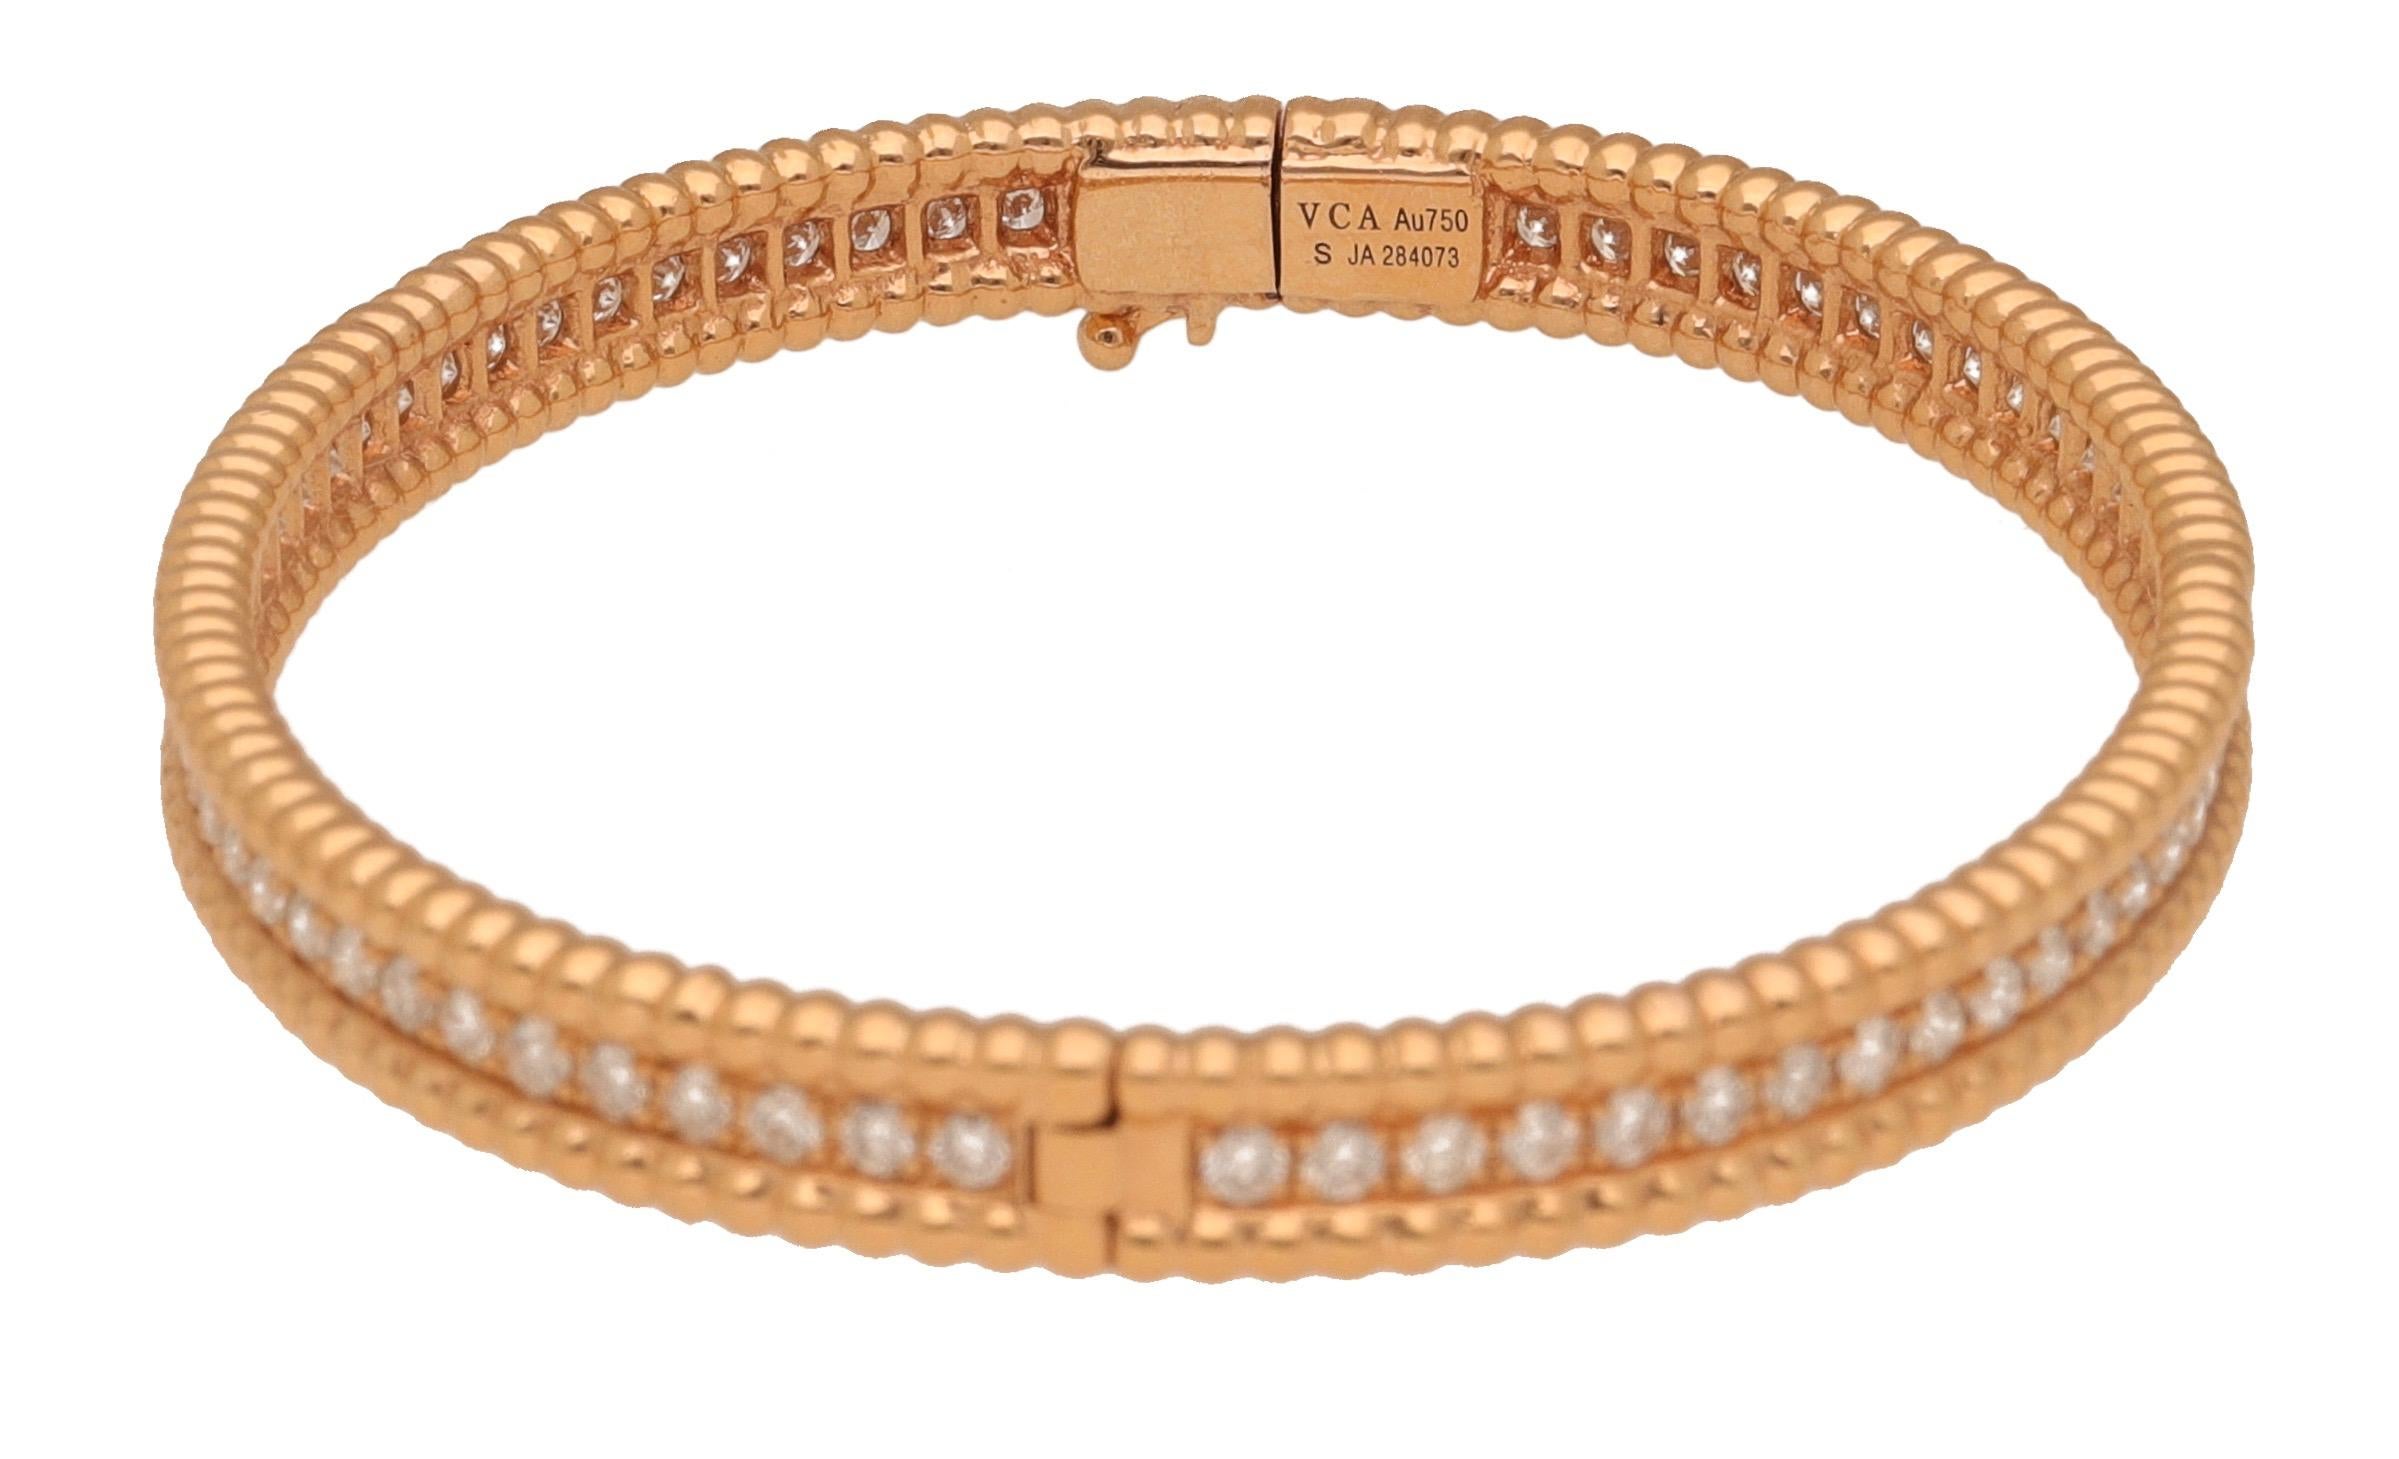 Van Cleef & Arpels Perlée diamonds bracelet, 1 row, 18K rose gold, 2.16 carats of round-cut diamonds, medium model; ( diamond quality DEF, IF to VVS. )
Blade clasp: blade in 18K white gold.
This endless design is perfect for every occasion.
The